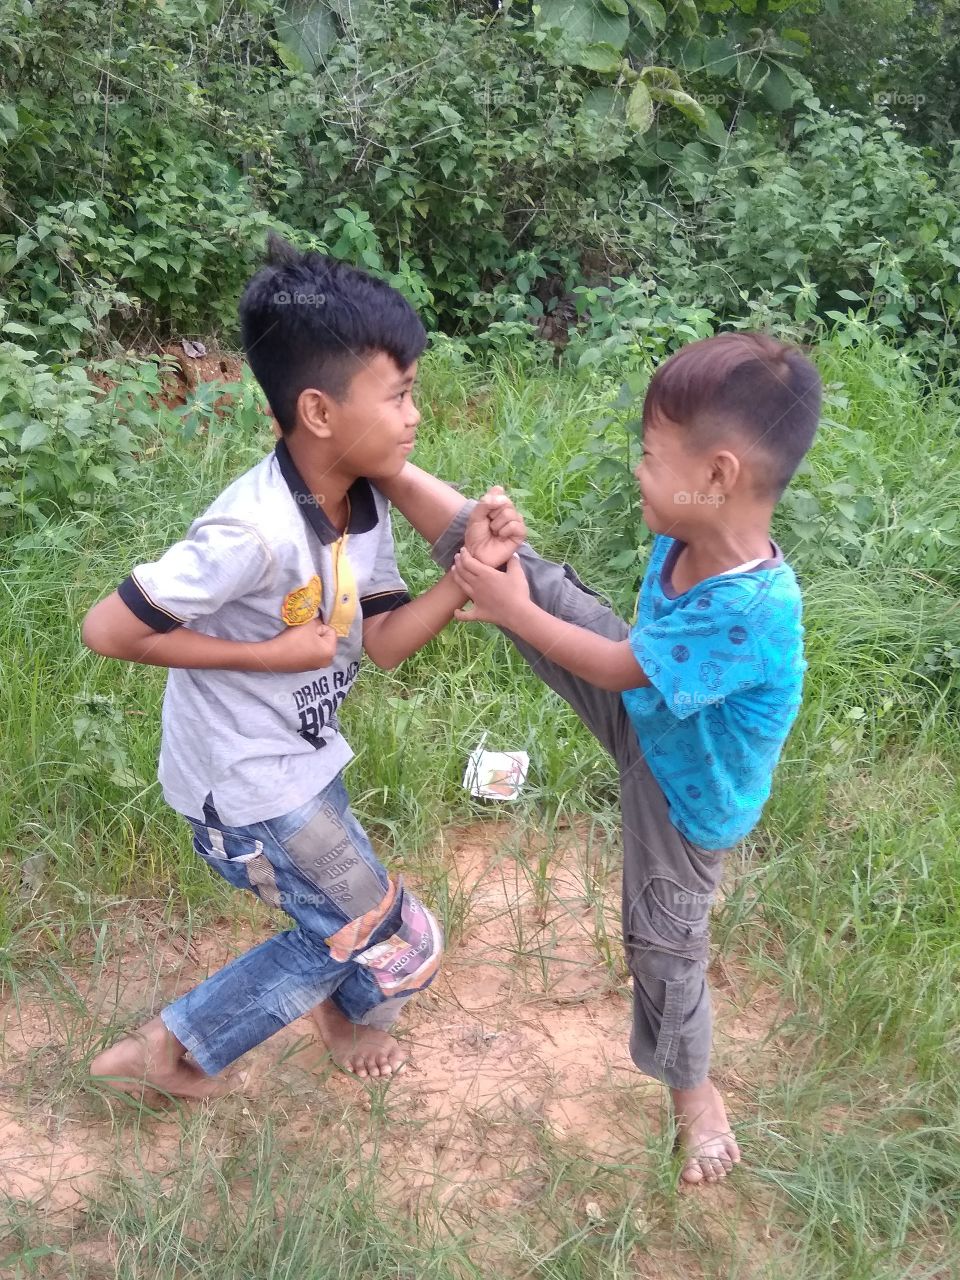 Another village kid acting silat